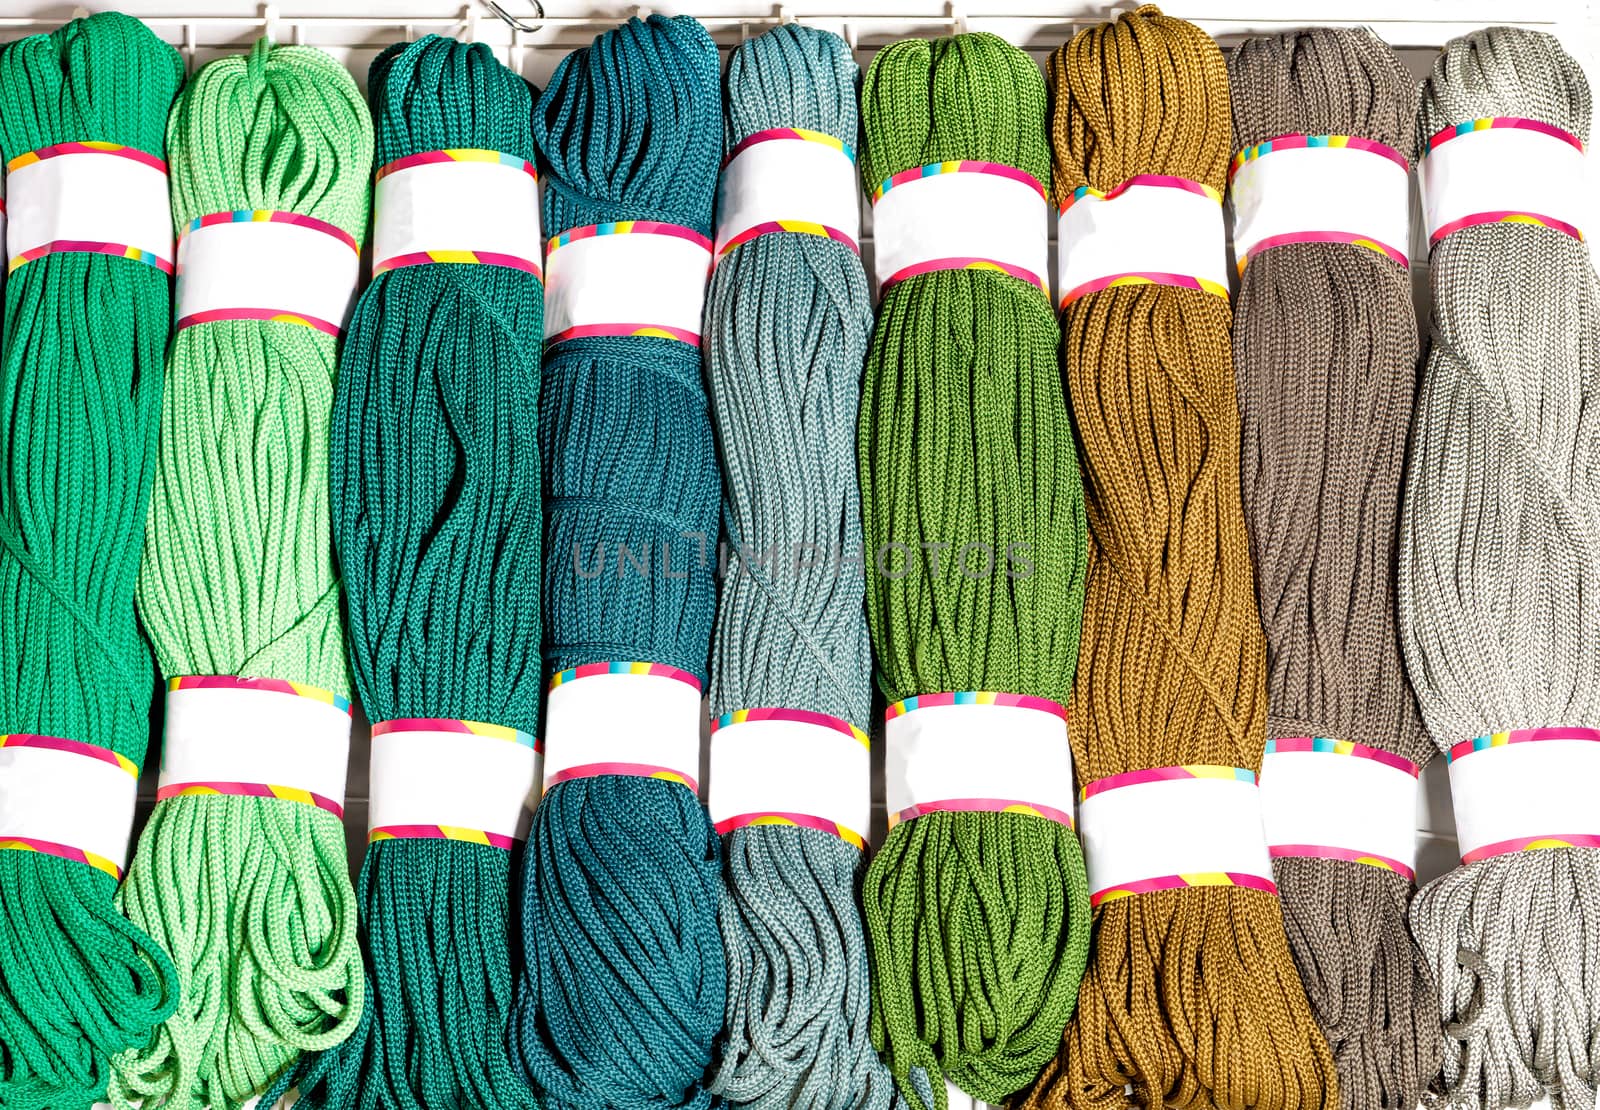 Skeins of polyester cord in various bright colors of green and beige. by Sergii